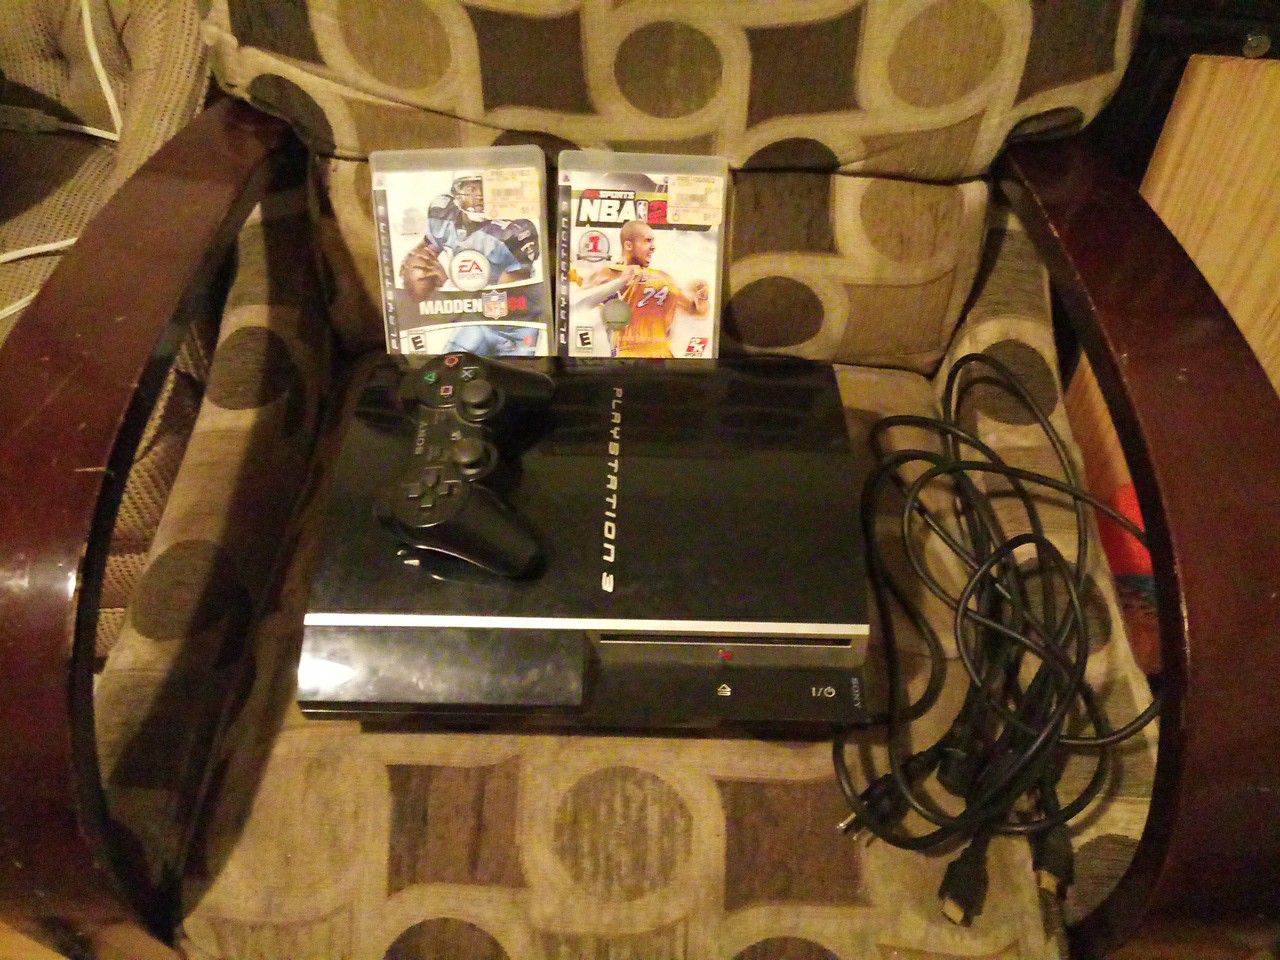 Original ps3 with 1 controller & 2 games